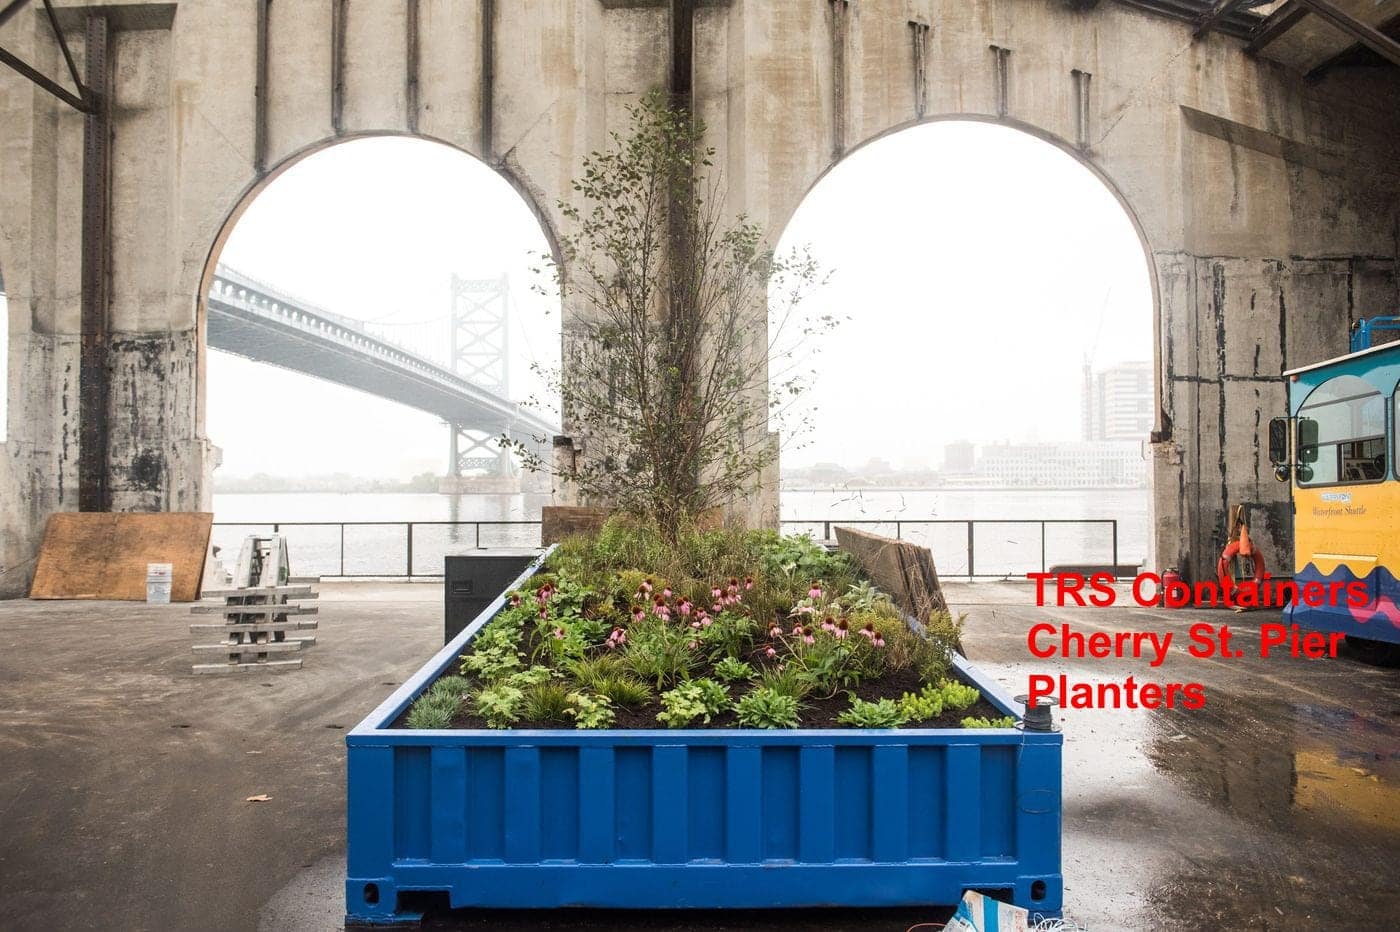 TRS fabricates malls, event space + planters